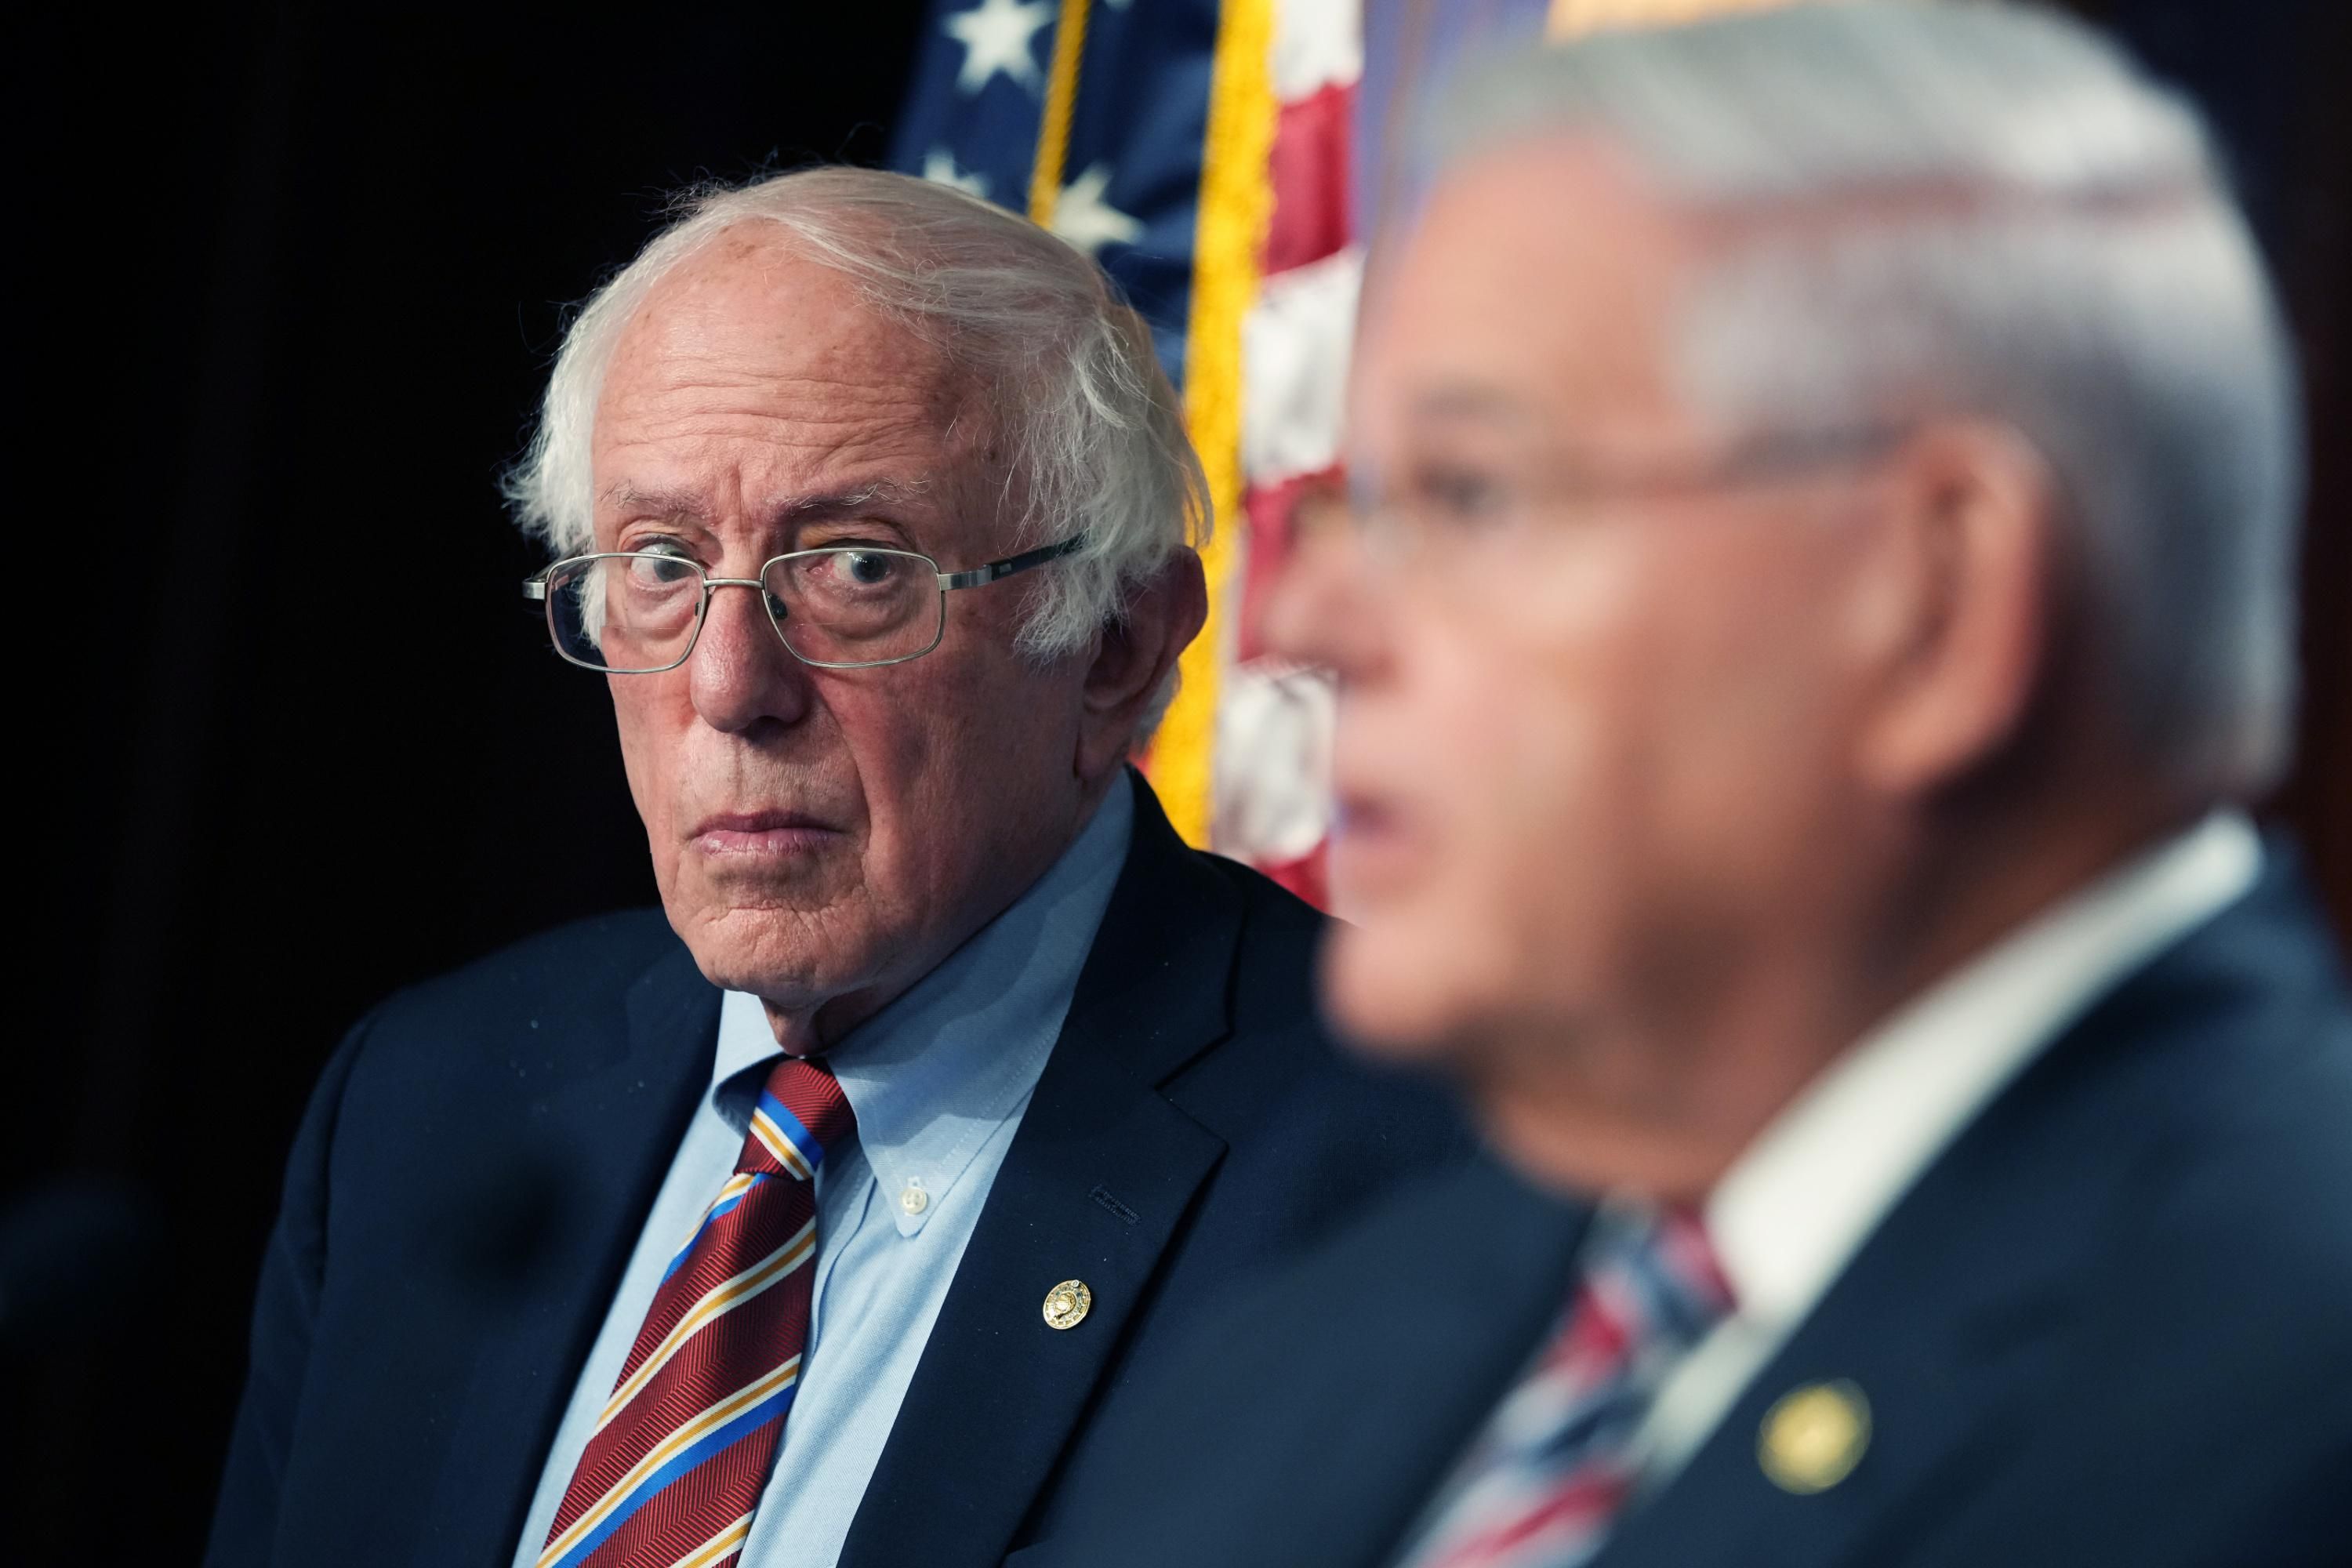 Sen. Bernie Sanders appears at a press conference.